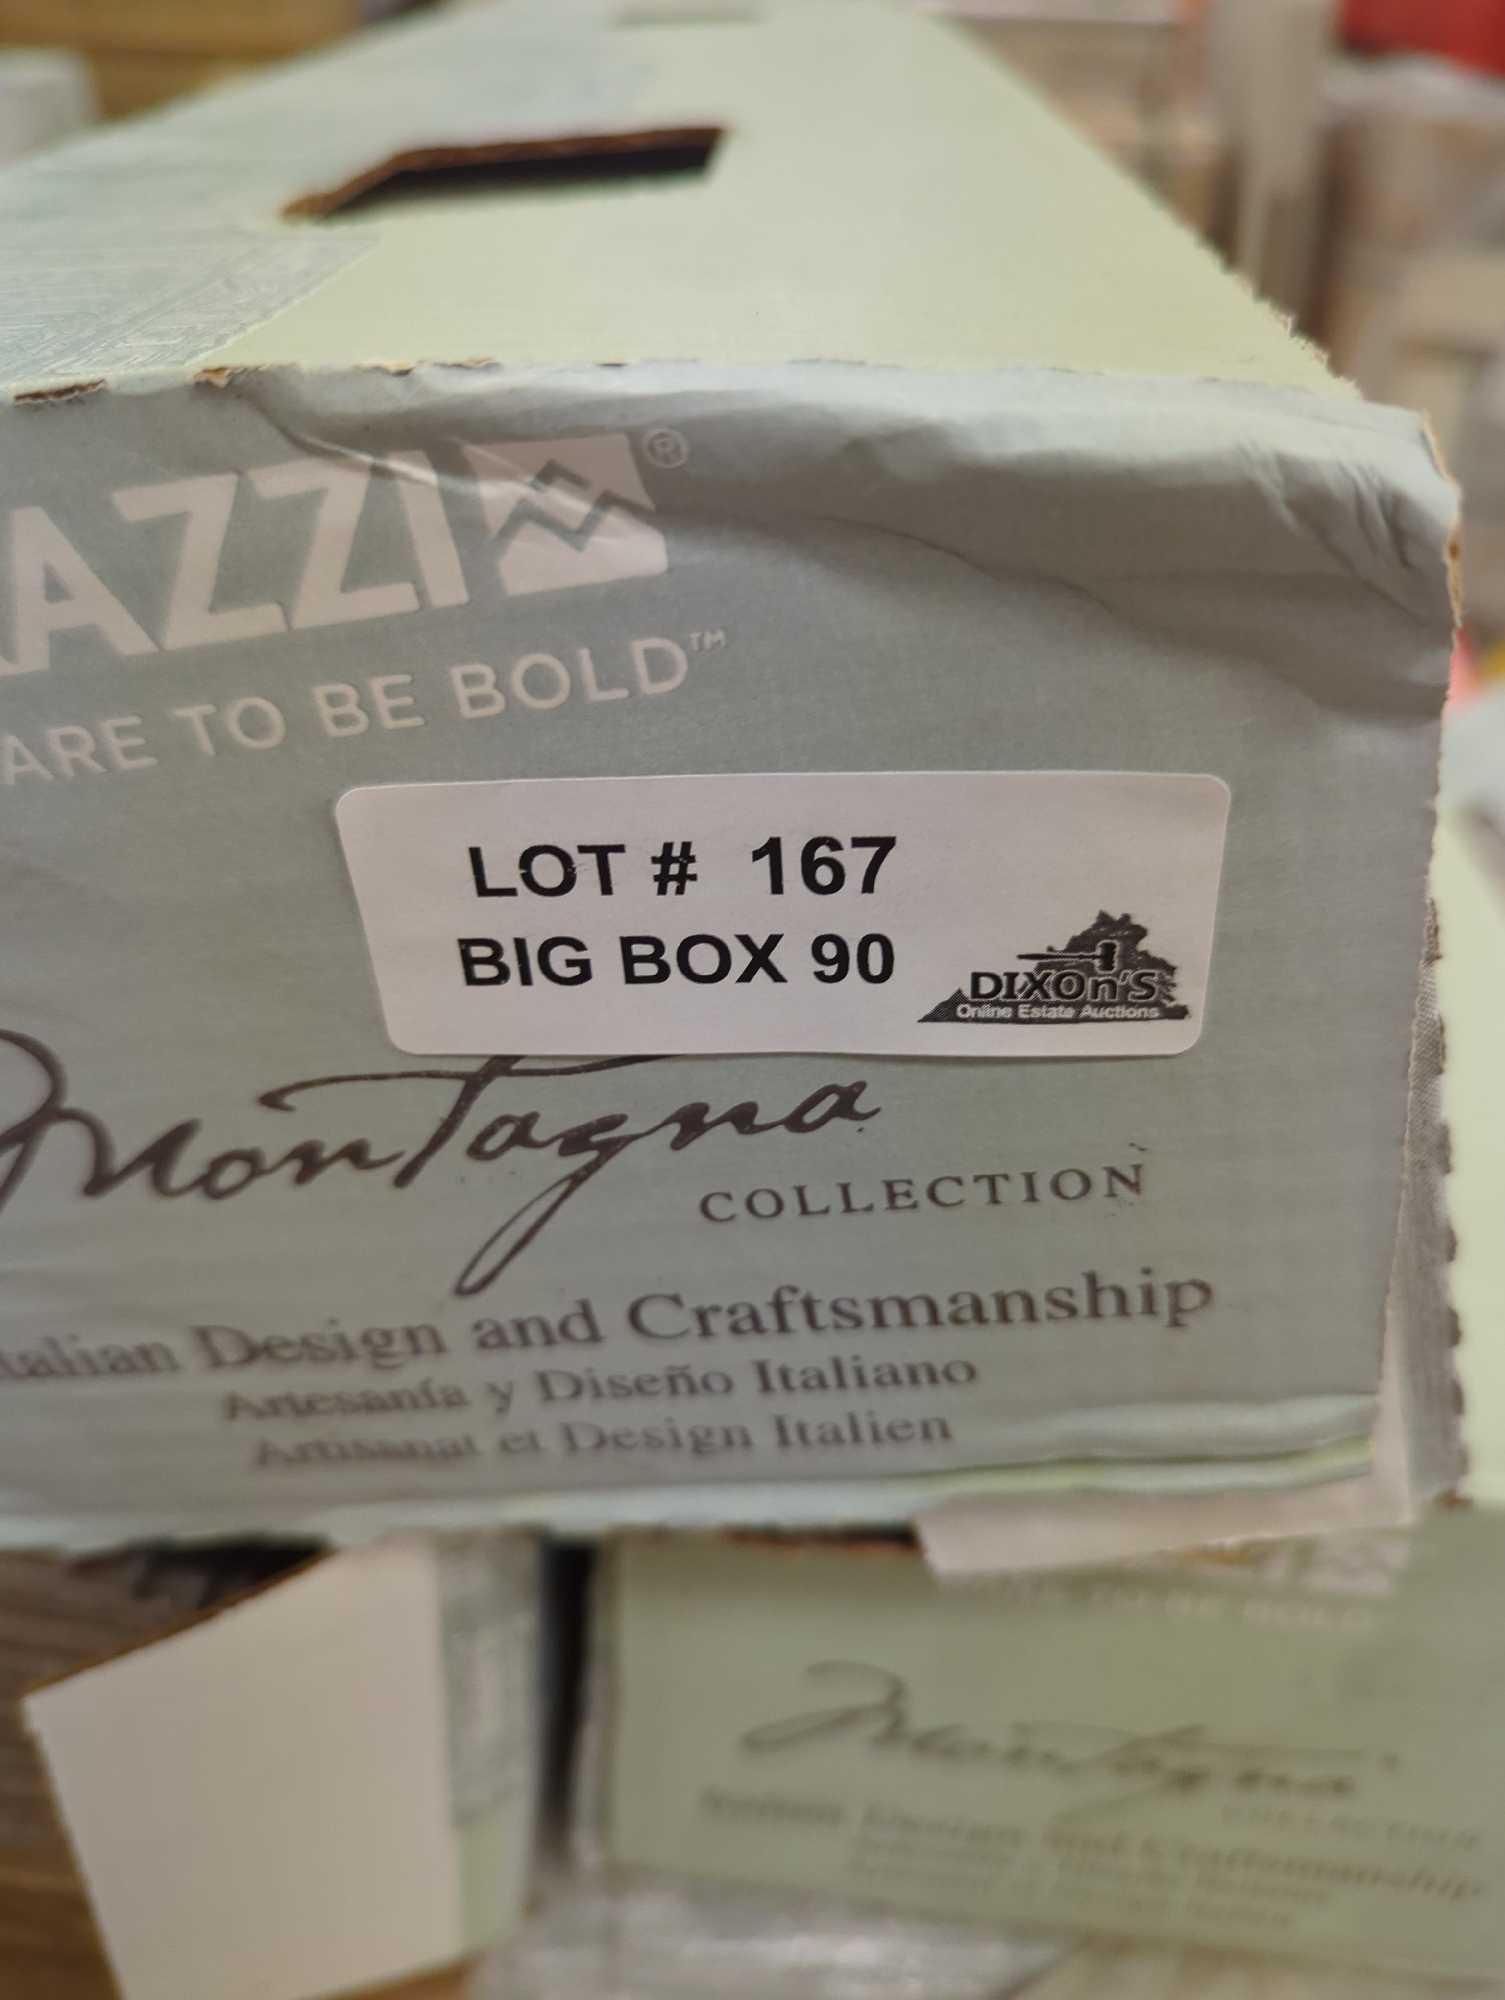 (May Have Some Broken Pieces) Pallet Lot of Approximately 25 Cases of Marazzi Montagna Rustic Bay 6